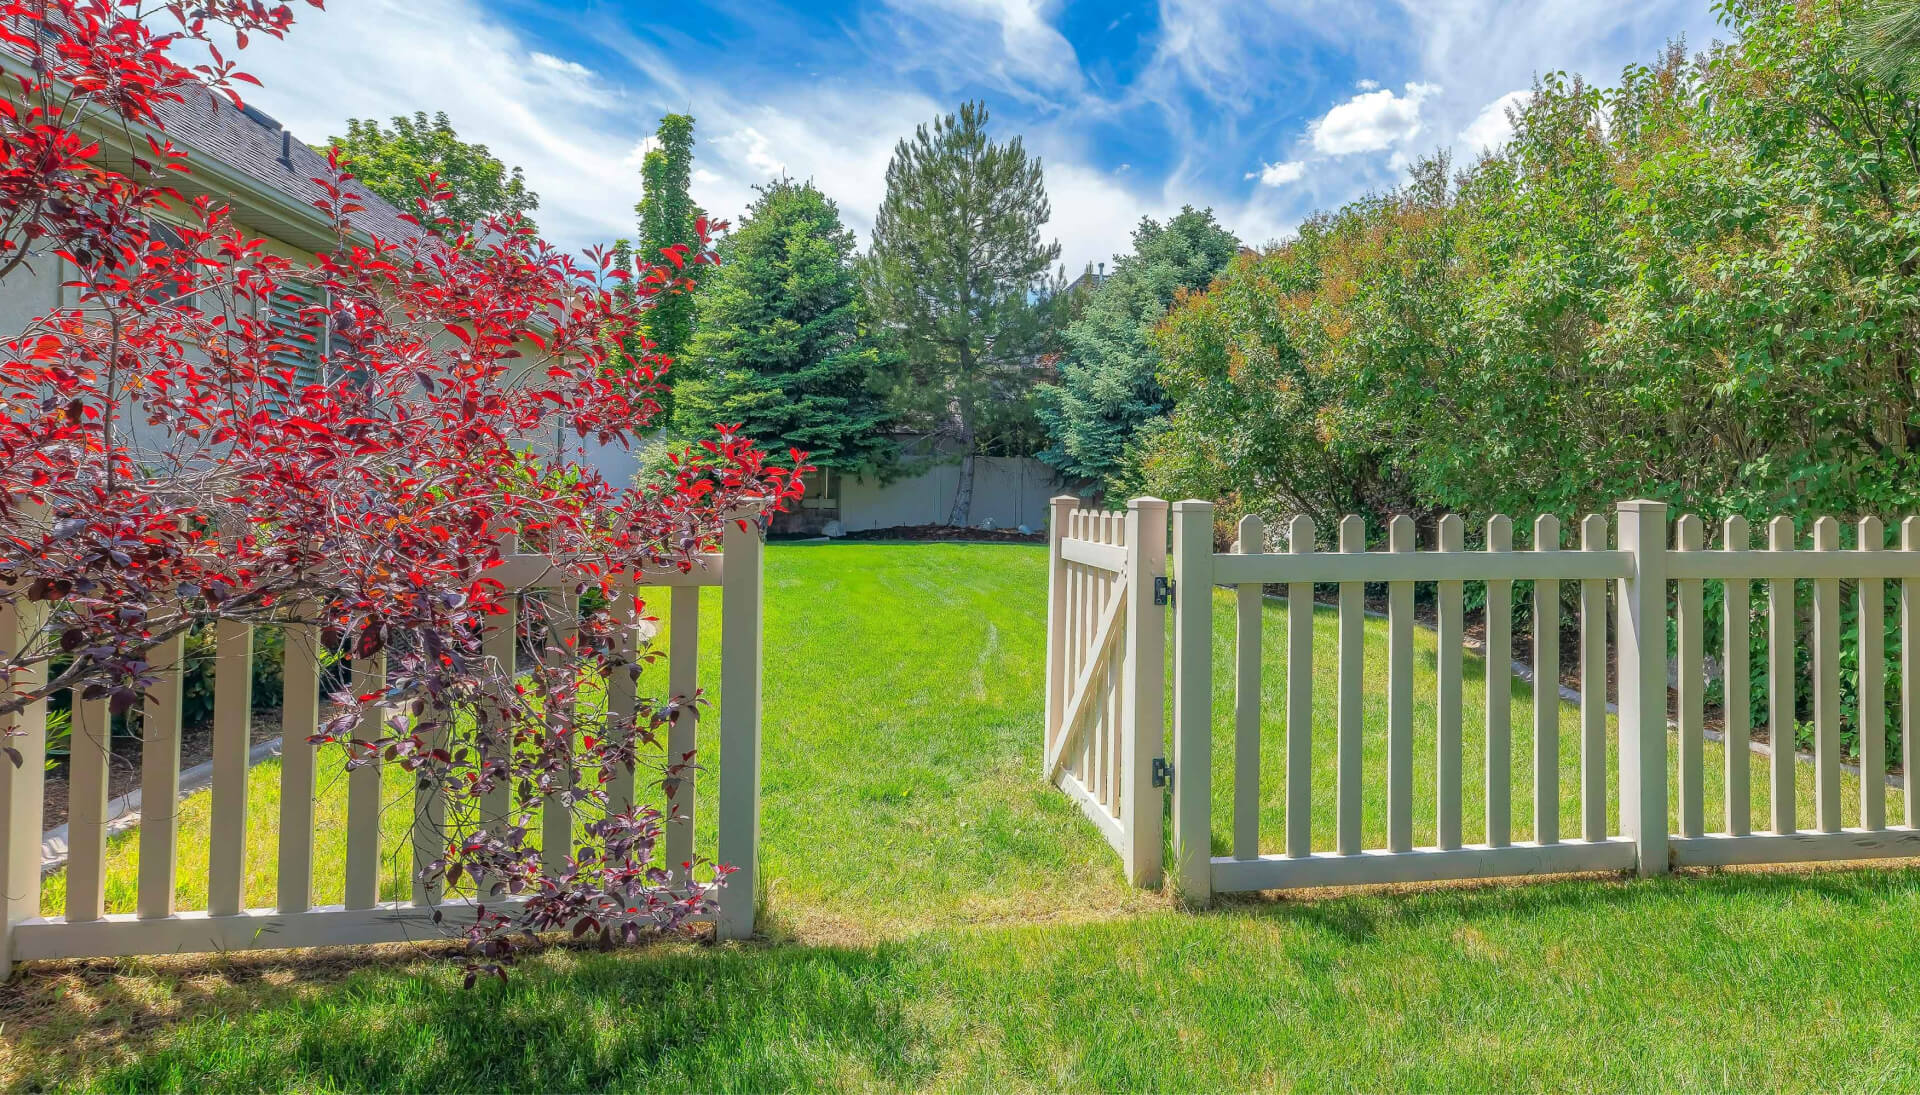 A functional fence gate providing access to a well-maintained backyard, surrounded by a wooden fence in Columbus